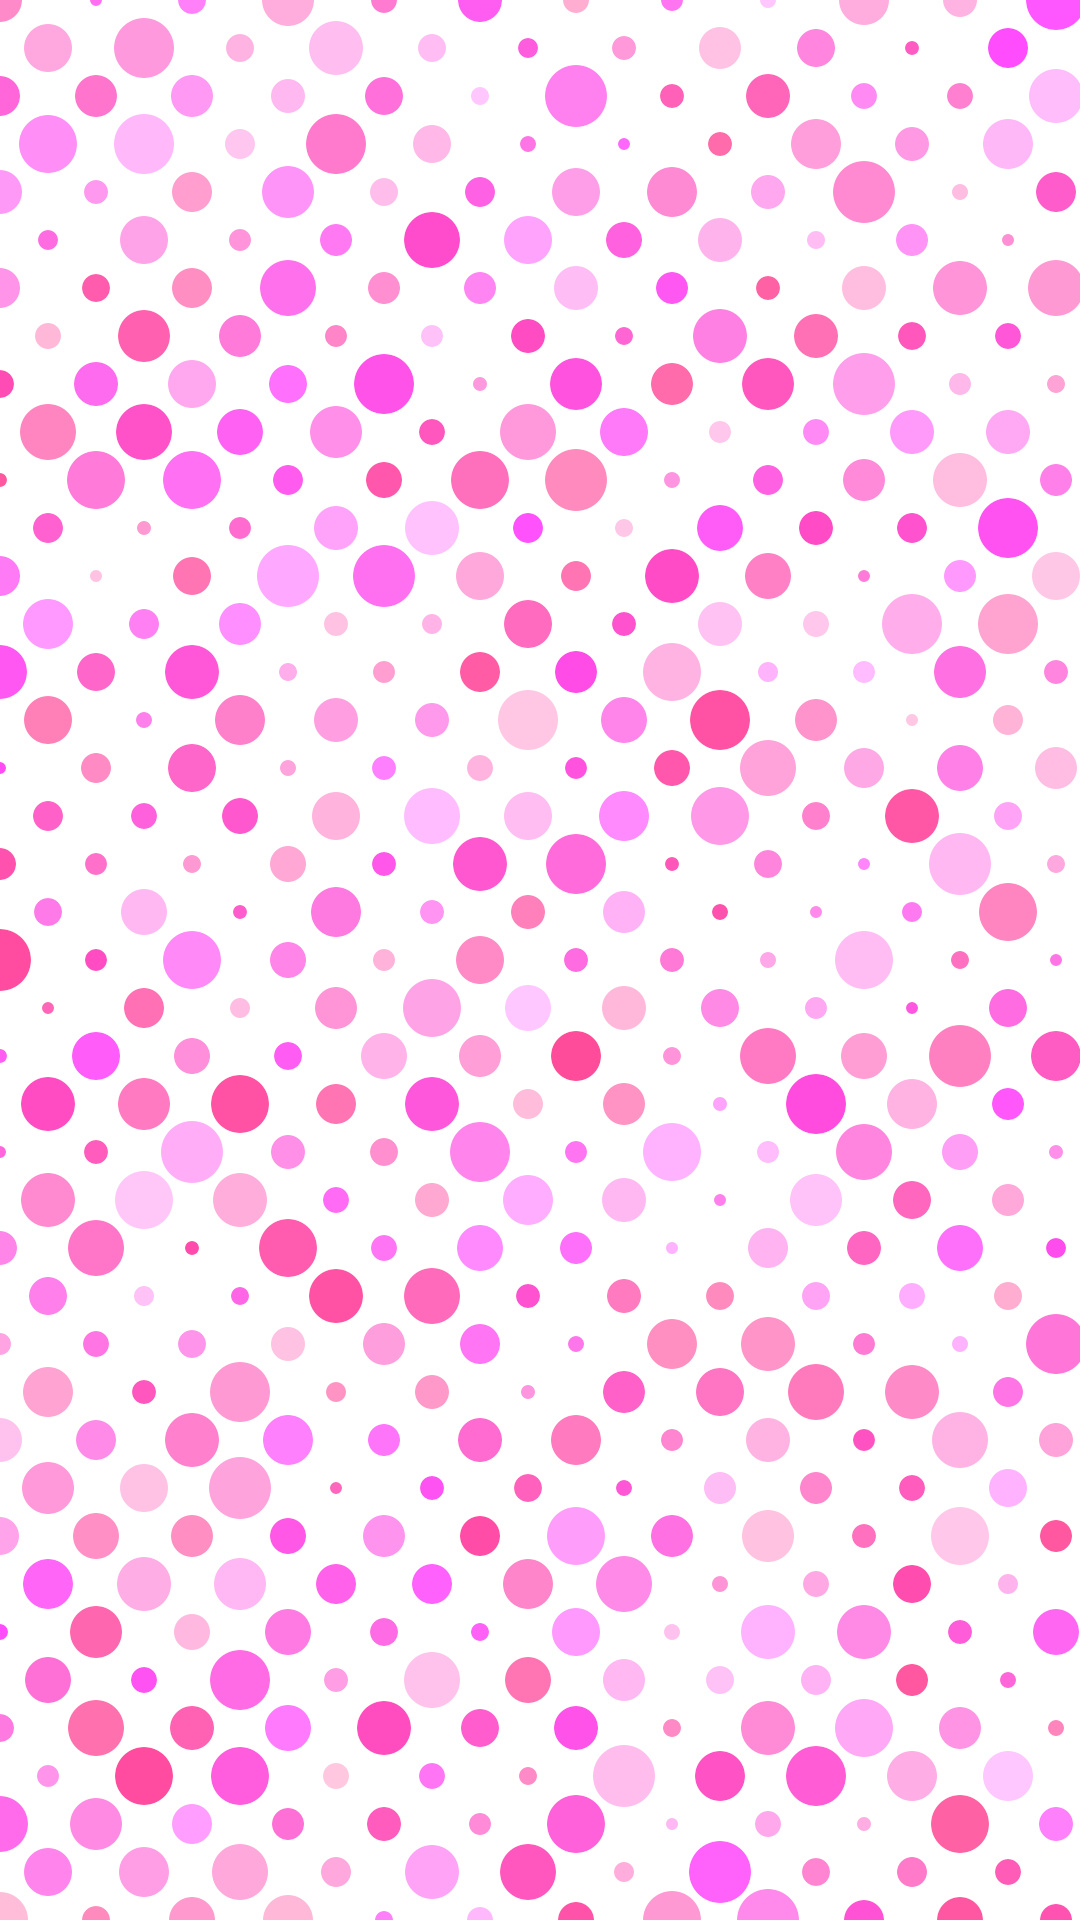 Pink polka dots, Playful background, Girly wallpaper, Youthful design, 1080x1920 Full HD Phone